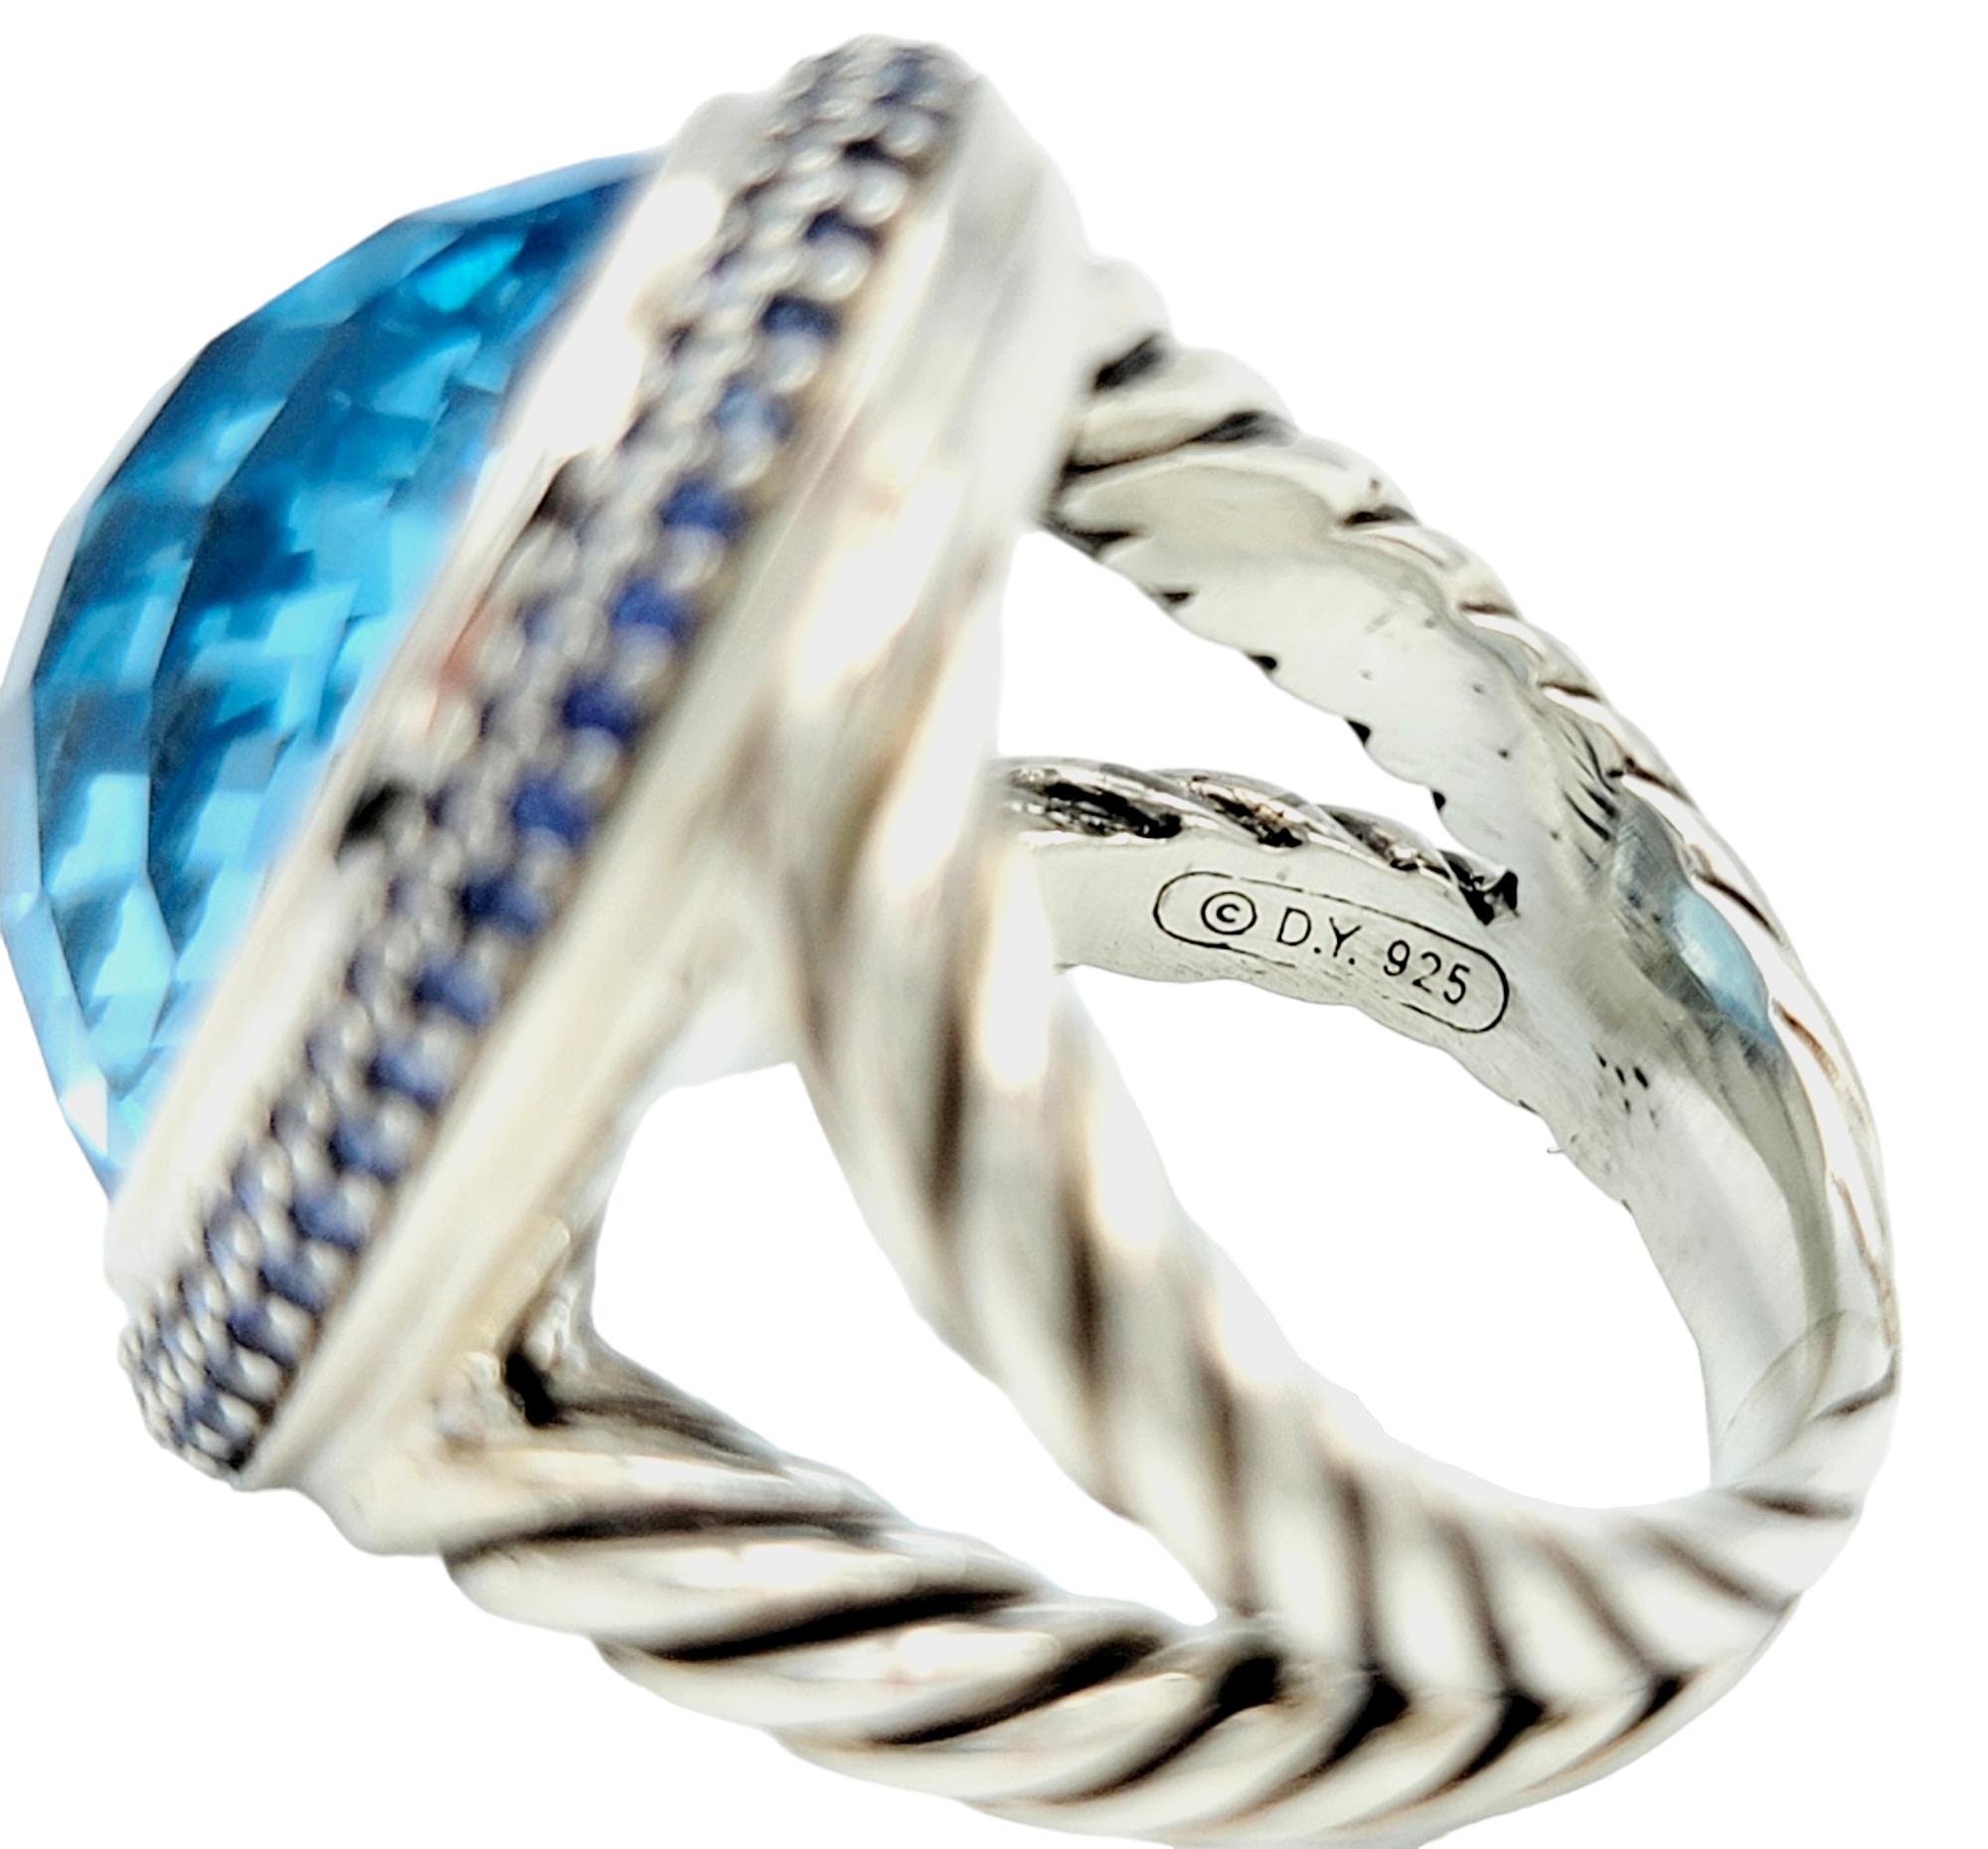 David Yurman Oval Blue Topaz and Blue Sapphire Cocktail Ring in Sterling Silver In Good Condition For Sale In Scottsdale, AZ